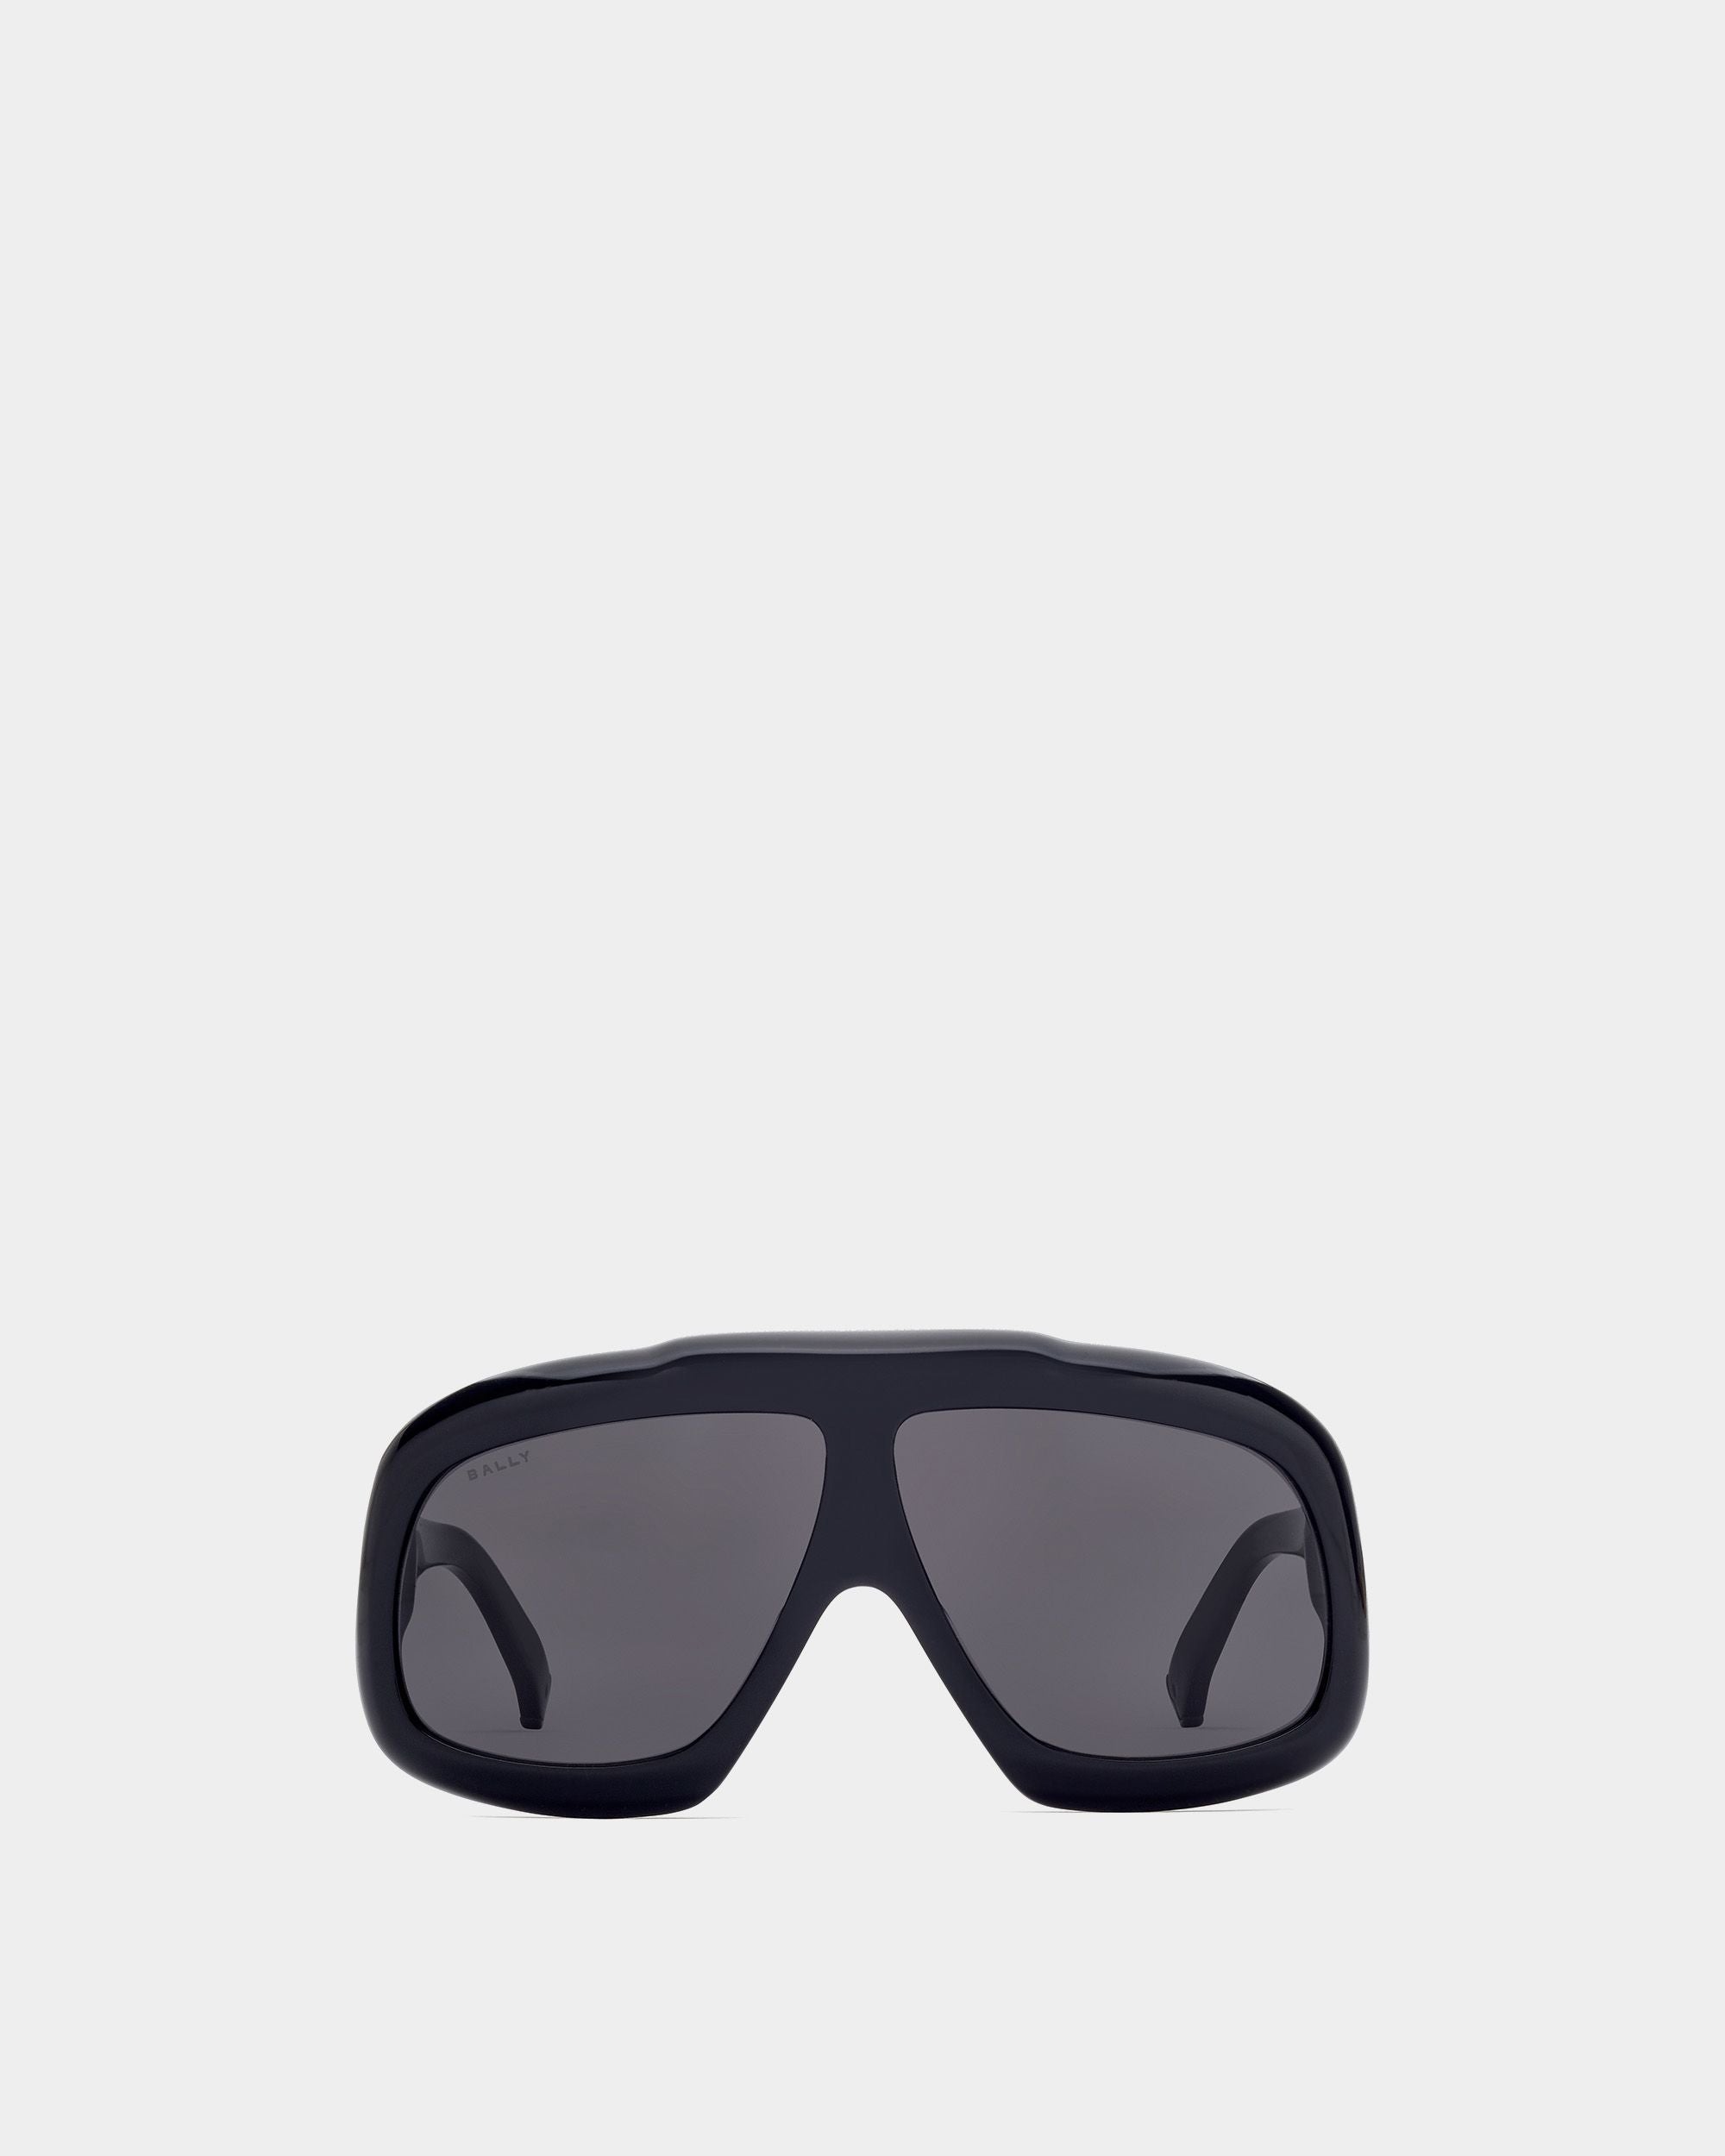 Eyger Sunglasses | Unisex Accessories | Black Acetate with Smoke Lenses | Bally | Still Life Front